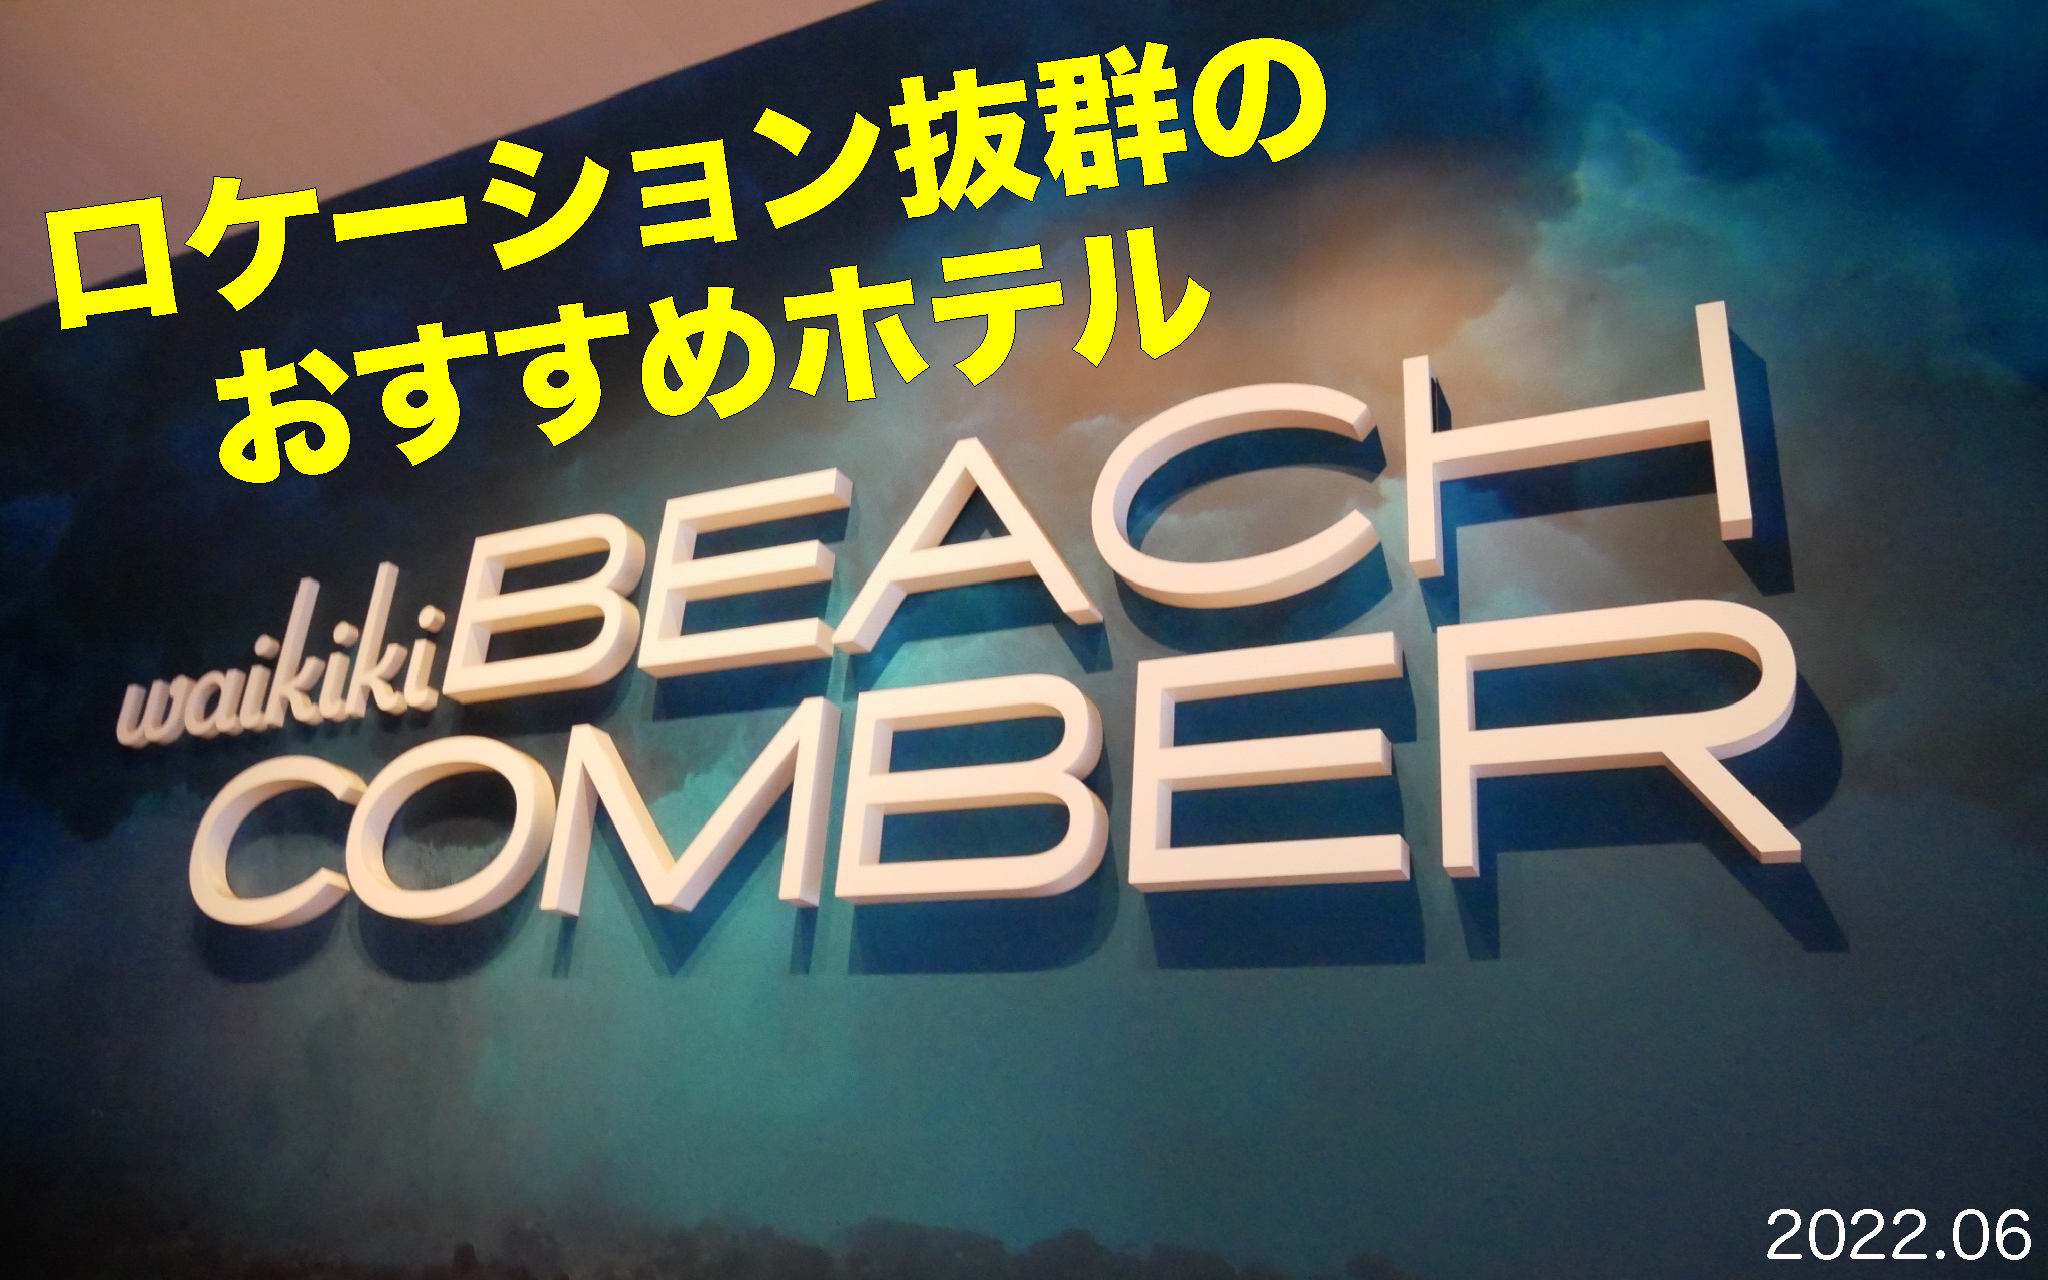 waikiki beach comber by outrigger